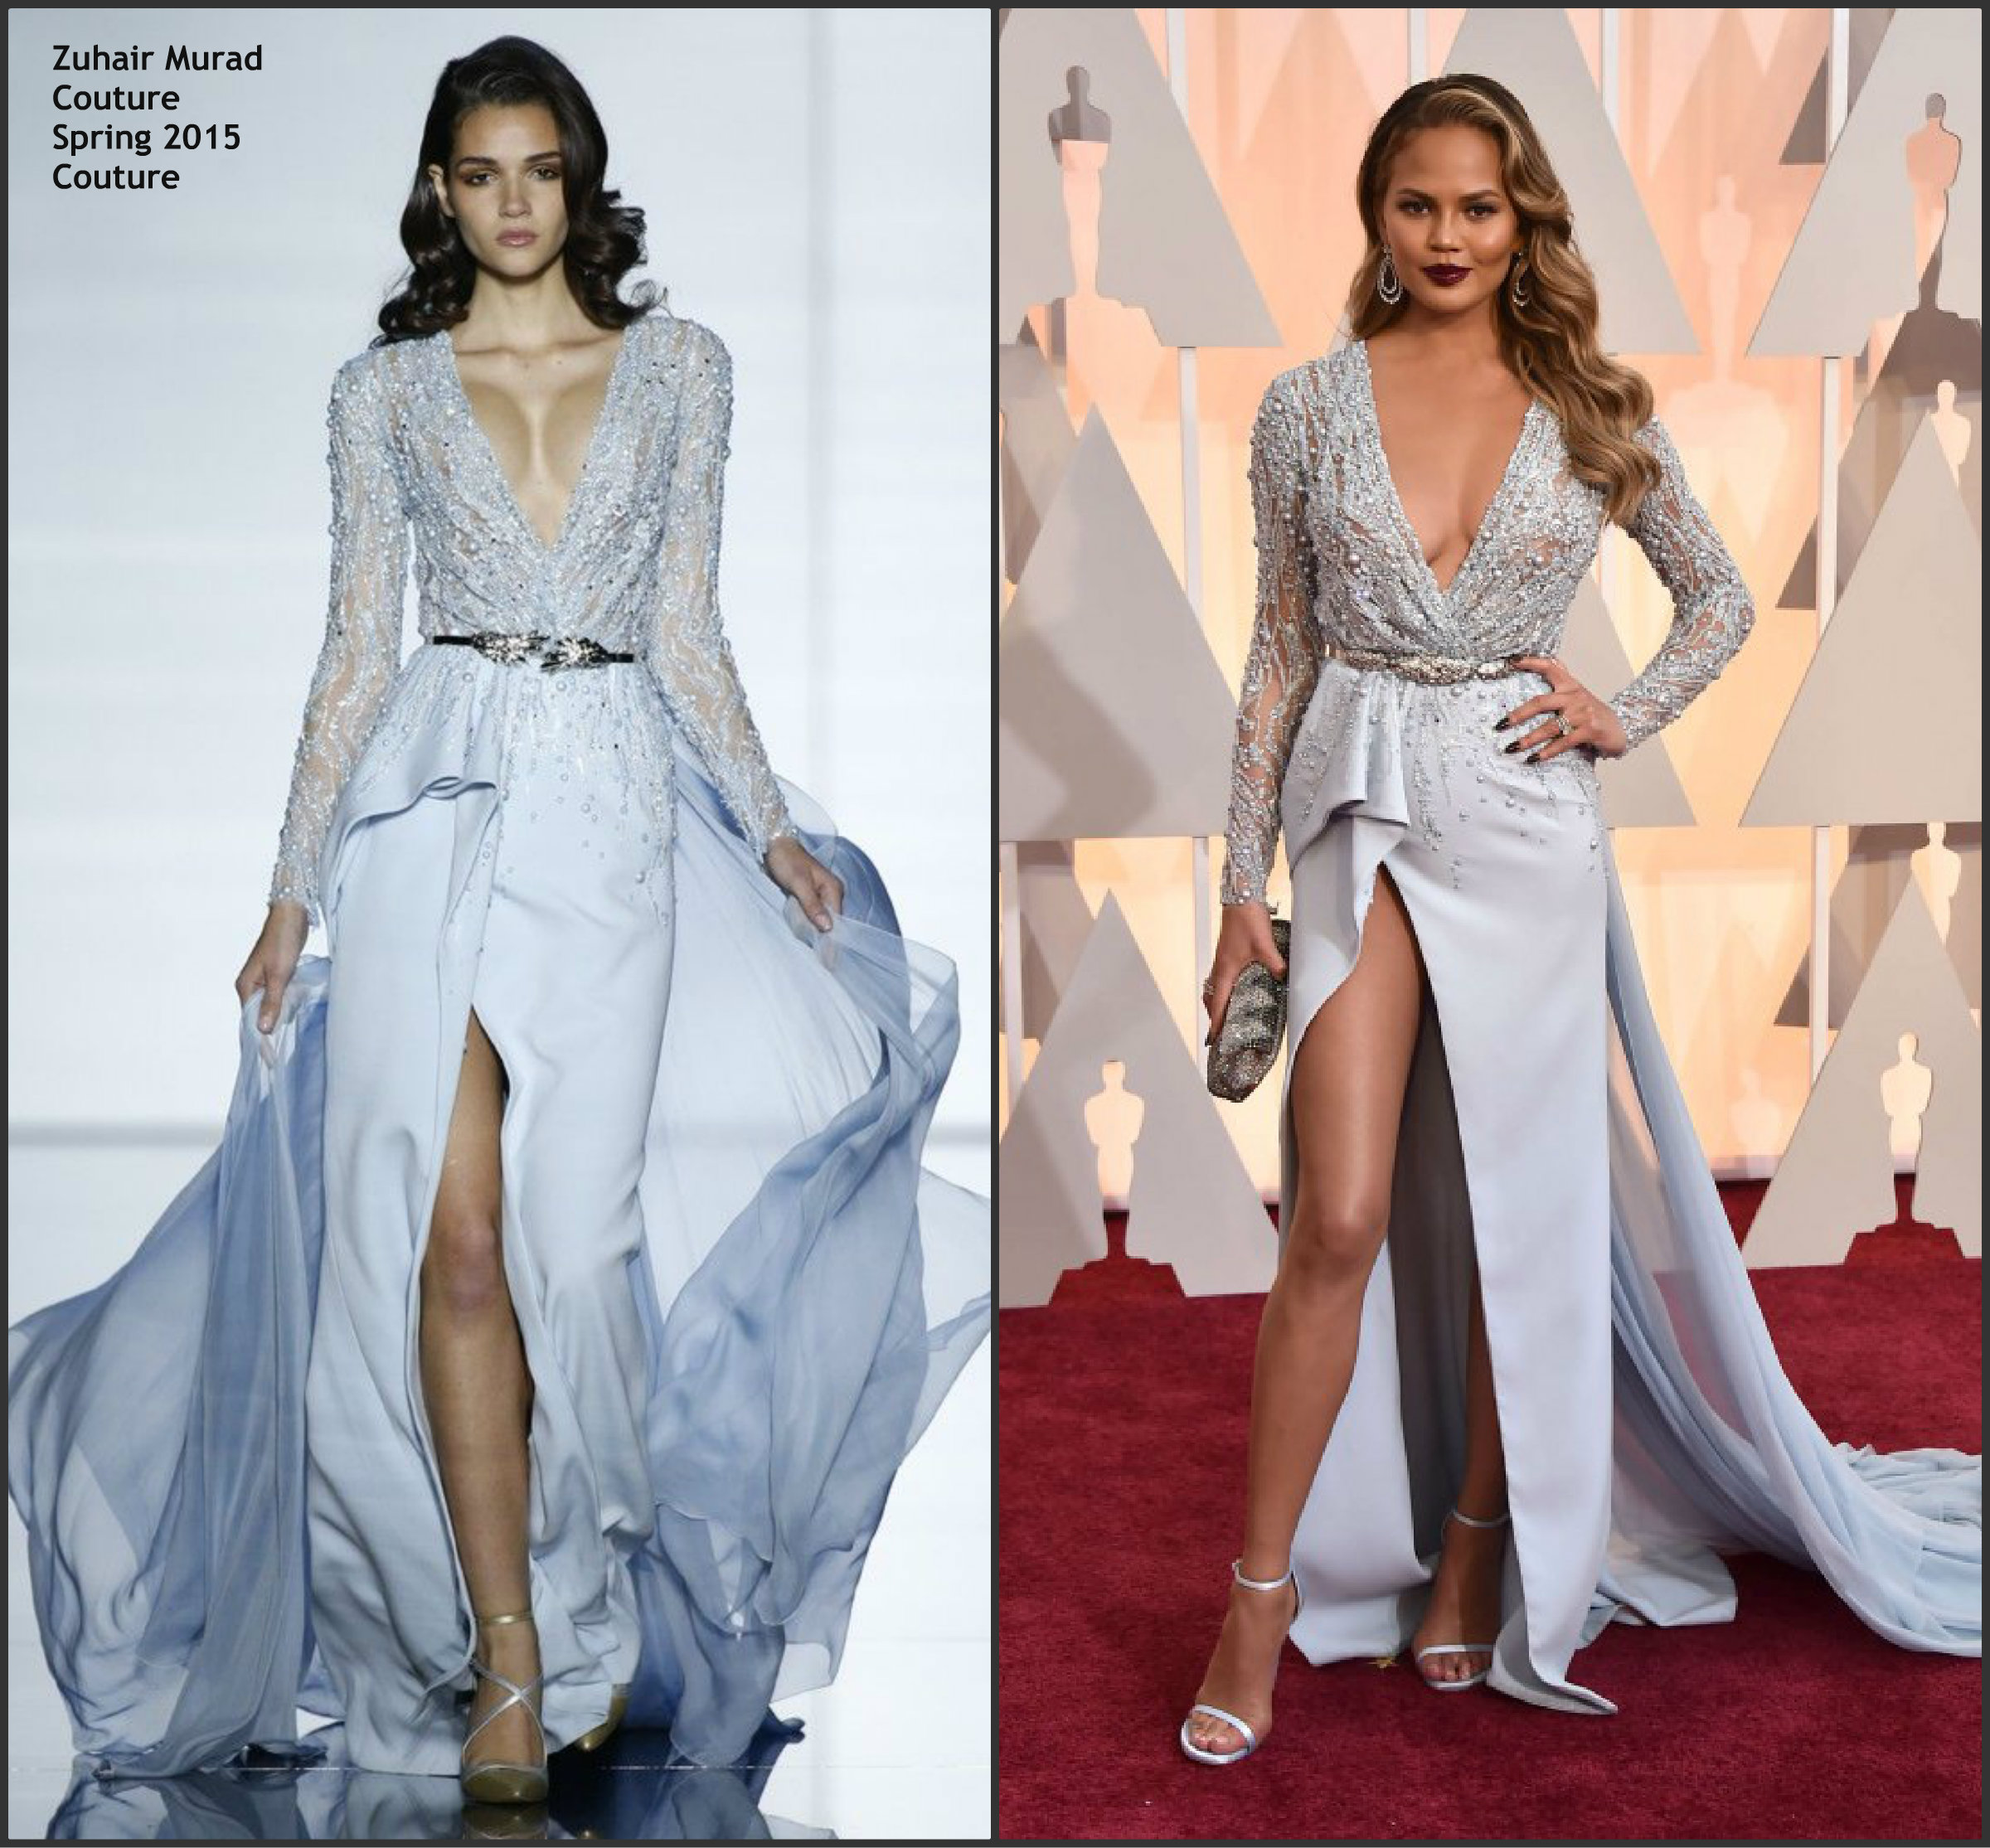 Chrissy-Teigen-In-Zuhair-Murad-Couture-at-the-2015-Oscars